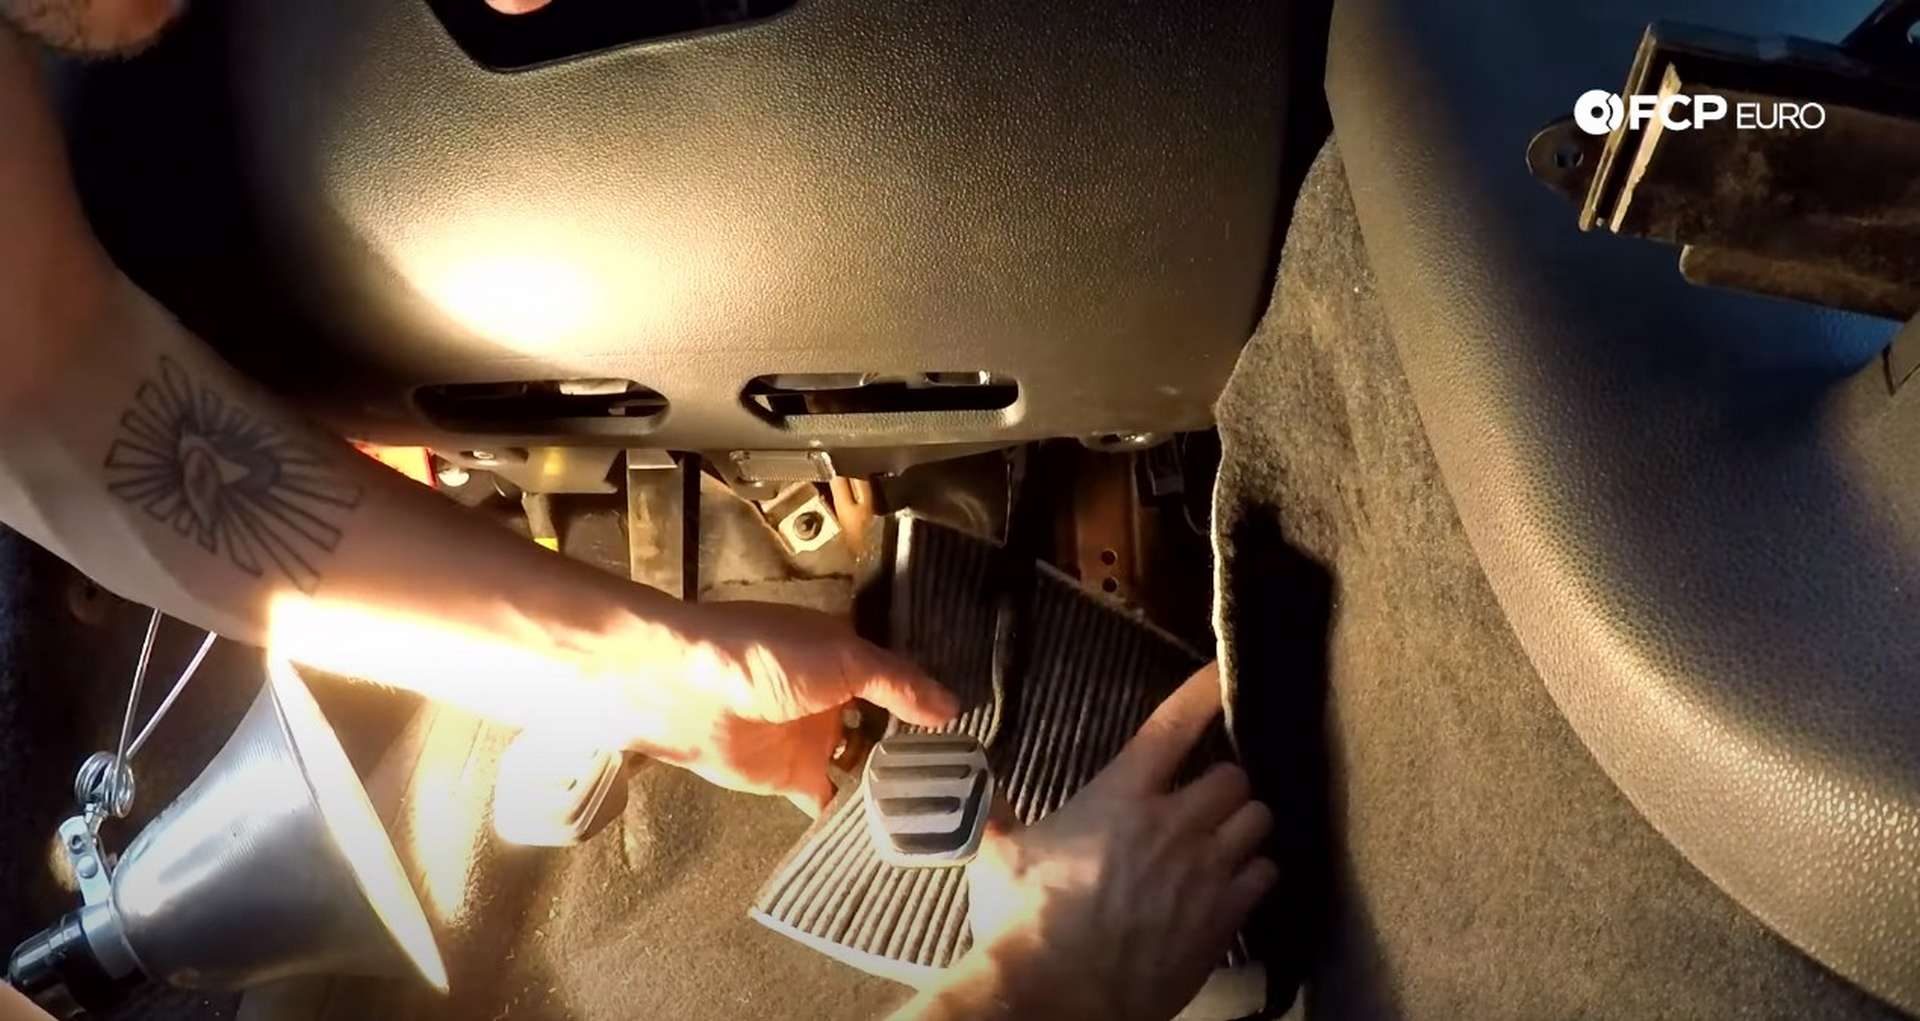 DIY Volvo Cabin Filter squeezing the new filter